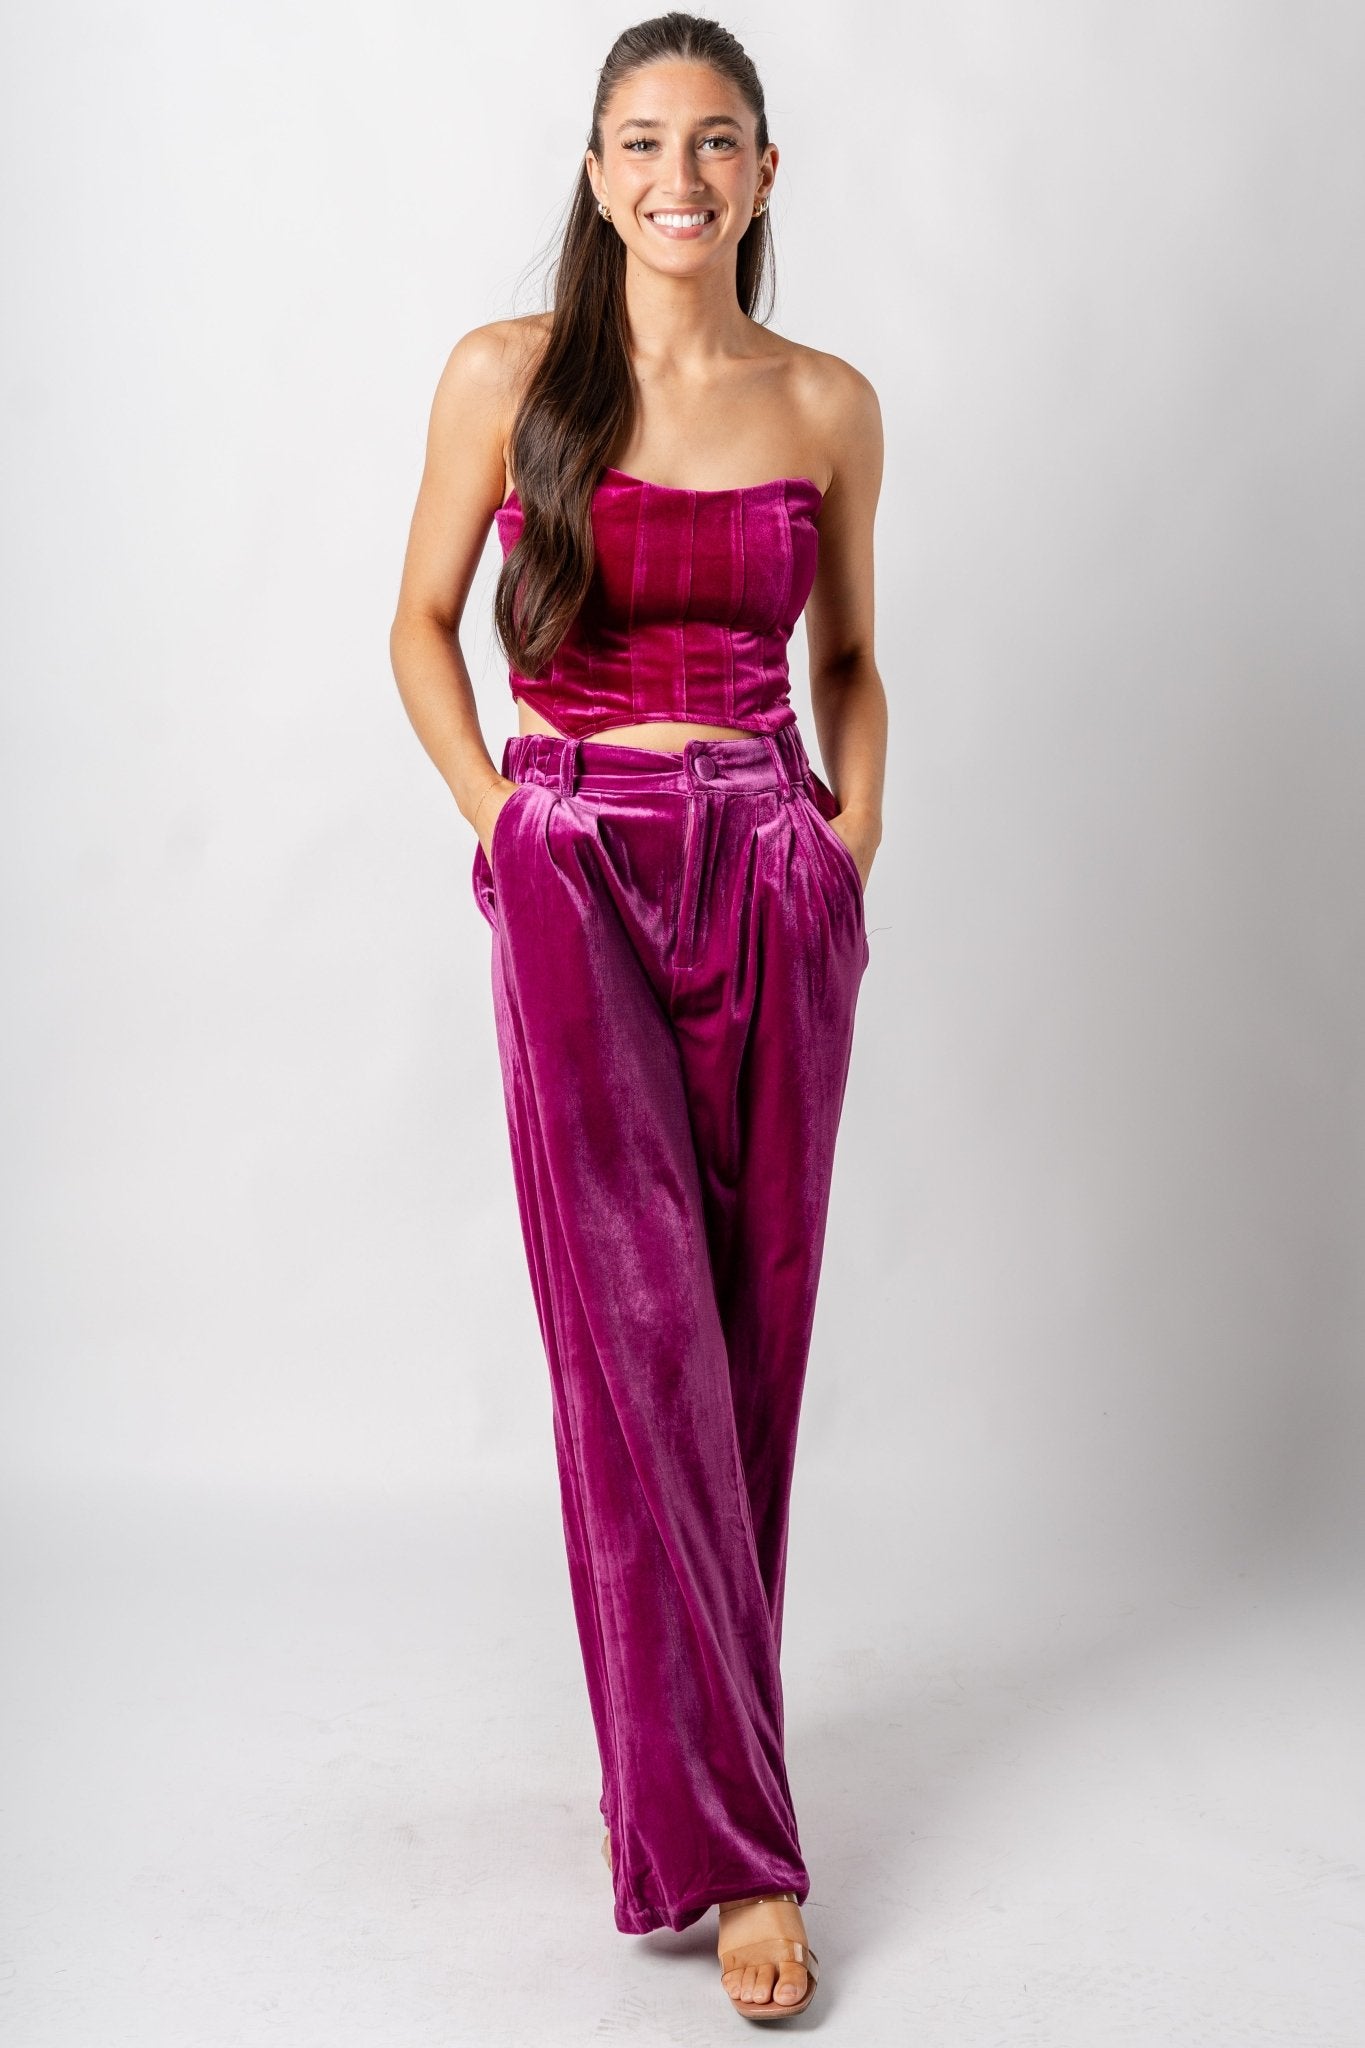 Velvet bustier top plum - Affordable New Year's Eve Party Outfits at Lush Fashion Lounge Boutique in Oklahoma City